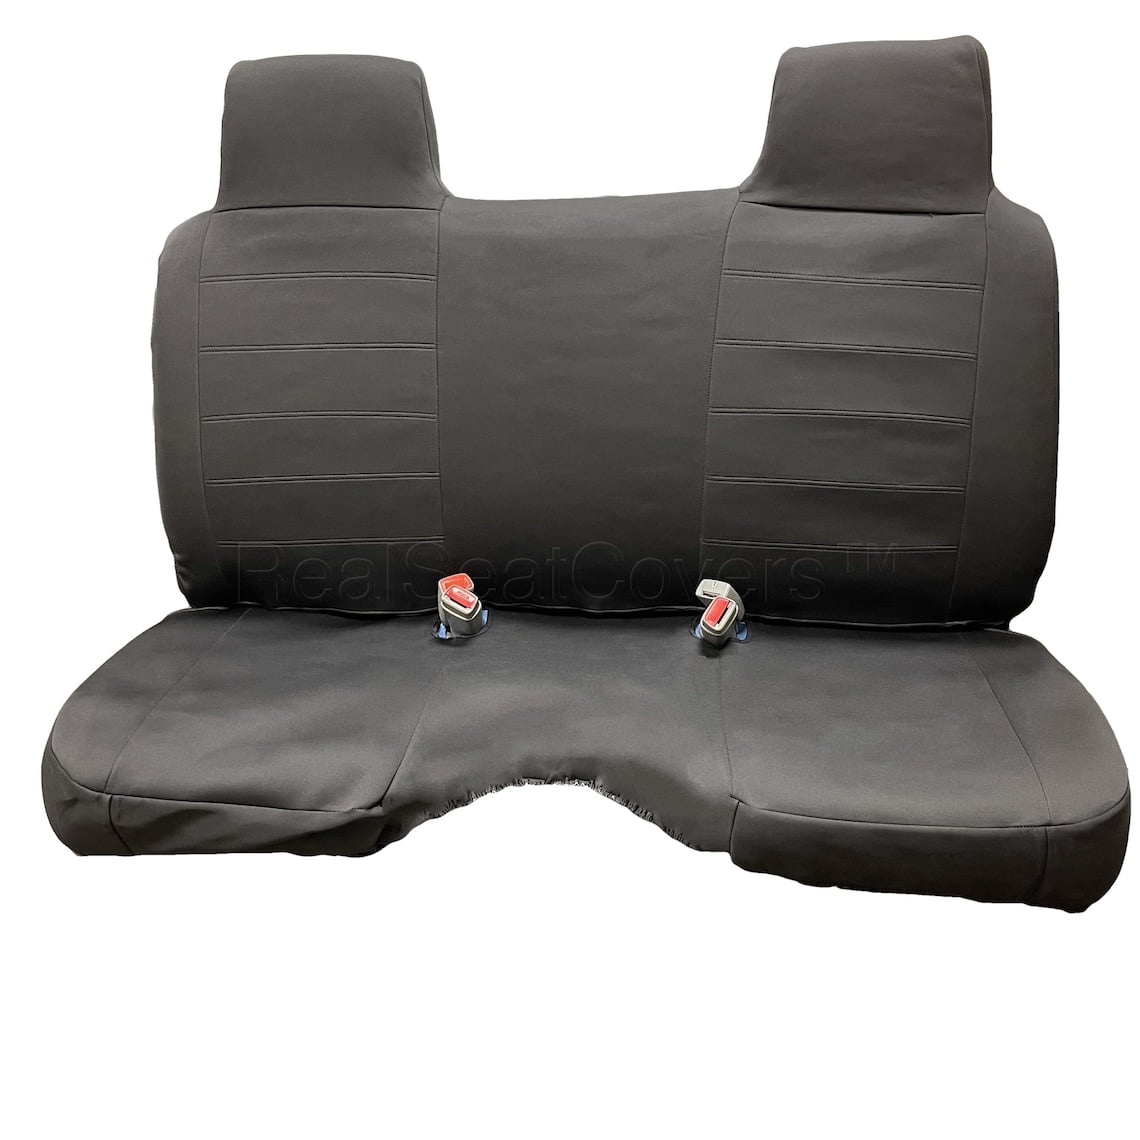 RealSeatCovers for Front Bench A25 Triple Stitched Molded Headrests Small 2 to 3 Shifter Cutout Seat Cover for Toyota Pickup 1990-1995 Gray 